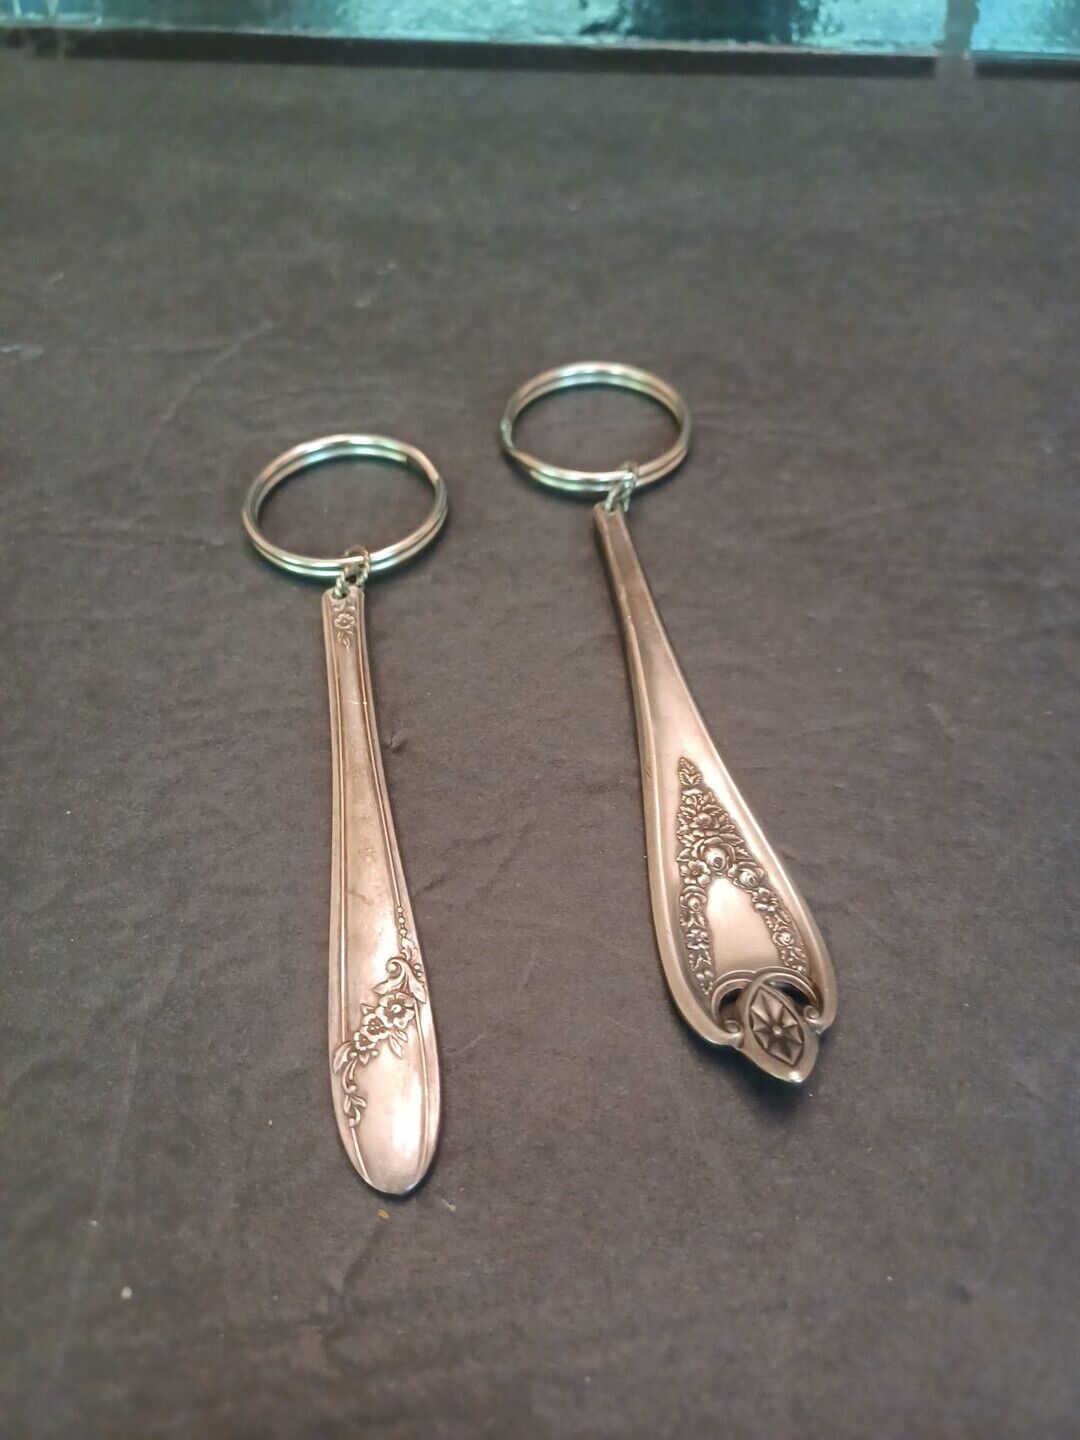 VTG KEY CHAINS/KEY FOBS (2) MADE FROM *ROGERS BROS* SILVERPLATE HANDLES USED